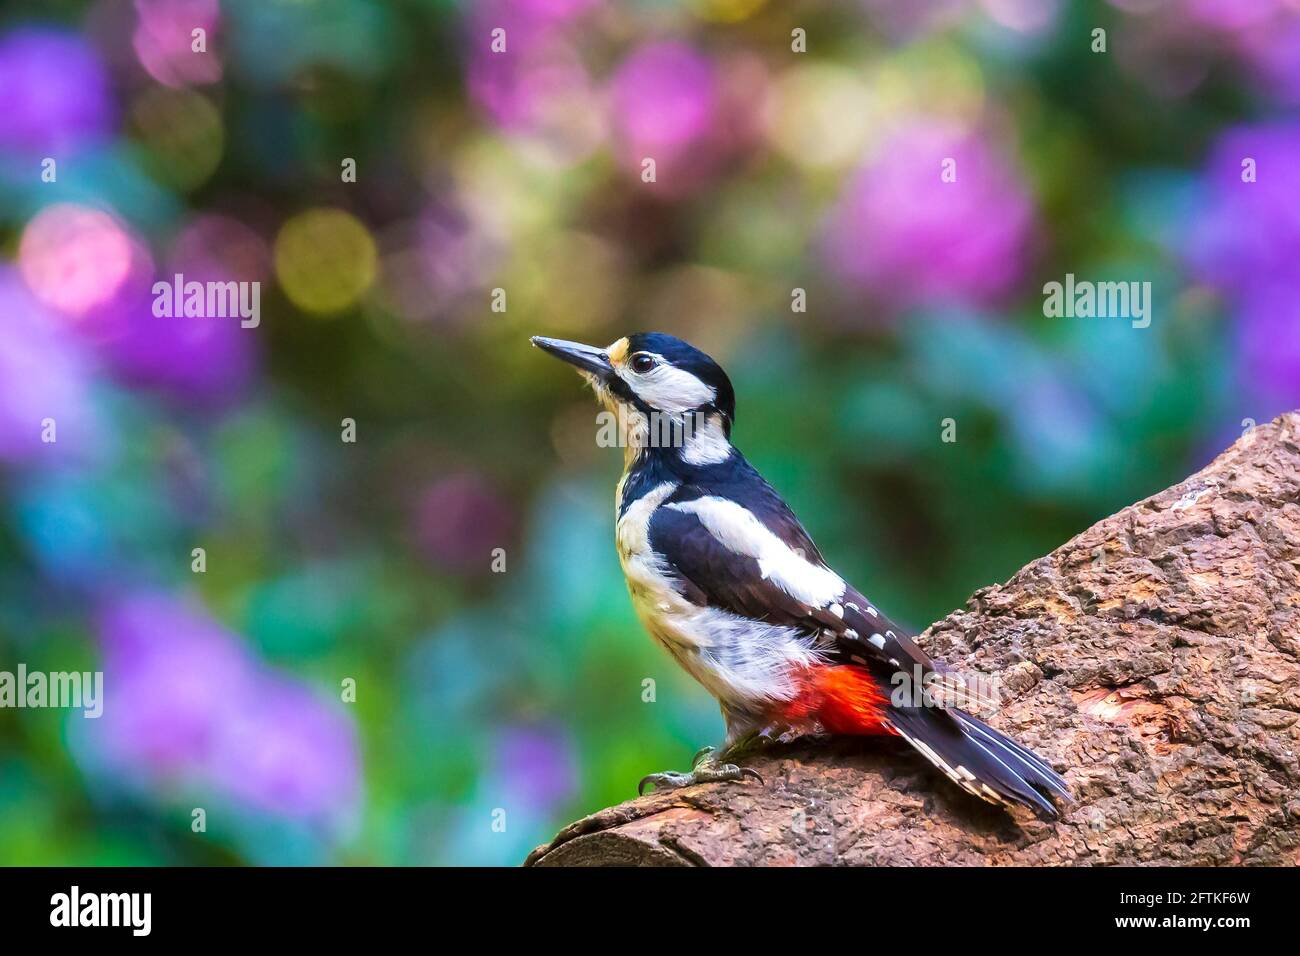 Closeup of a great spotted woodpecker bird, Dendrocopos major, perched in a forest in Summer season Stock Photo